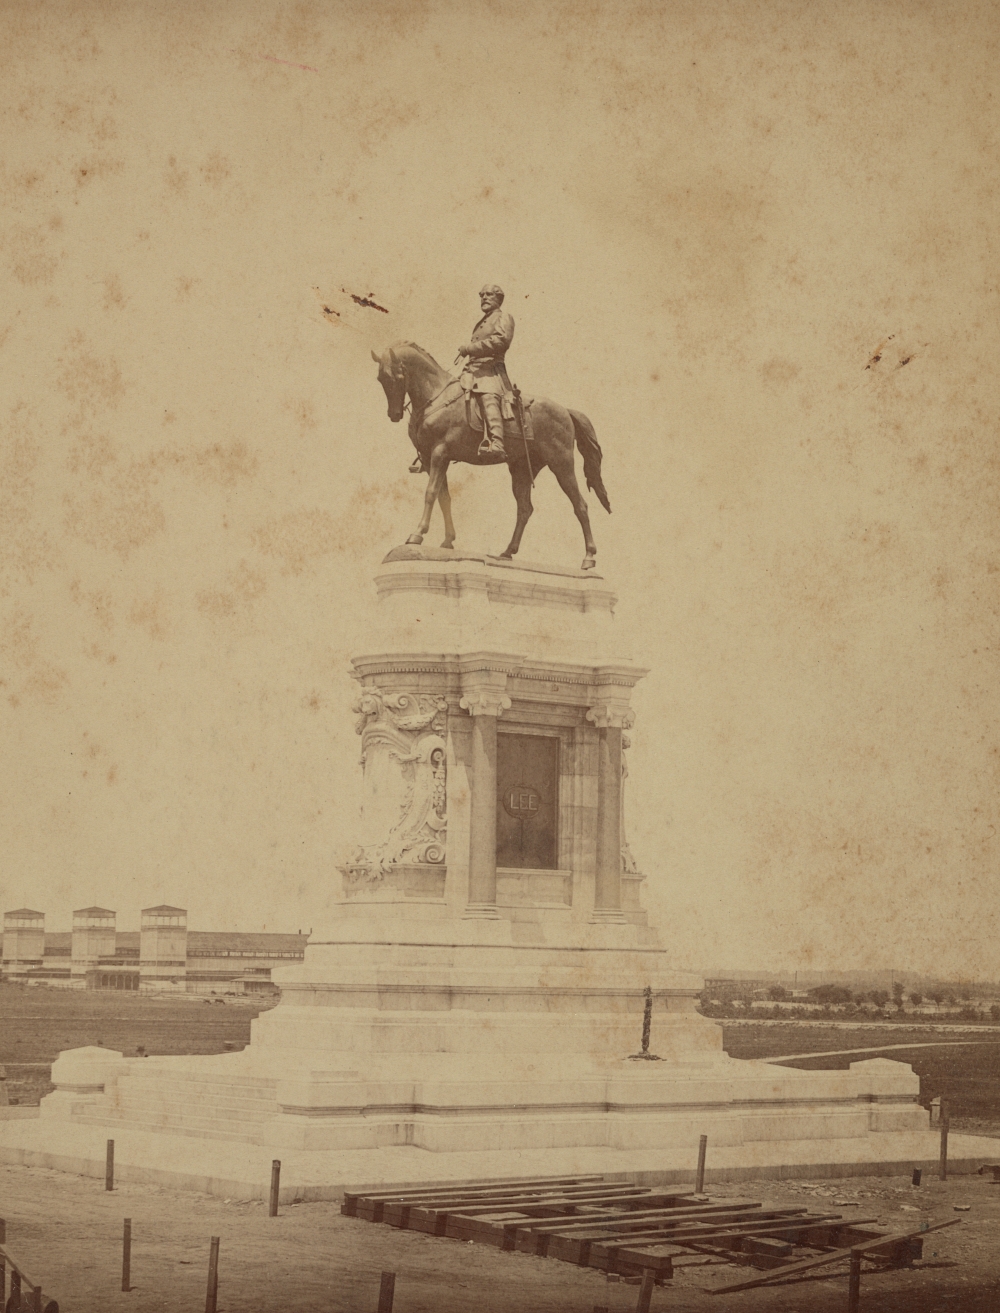 Robert E Lee monument in 1890